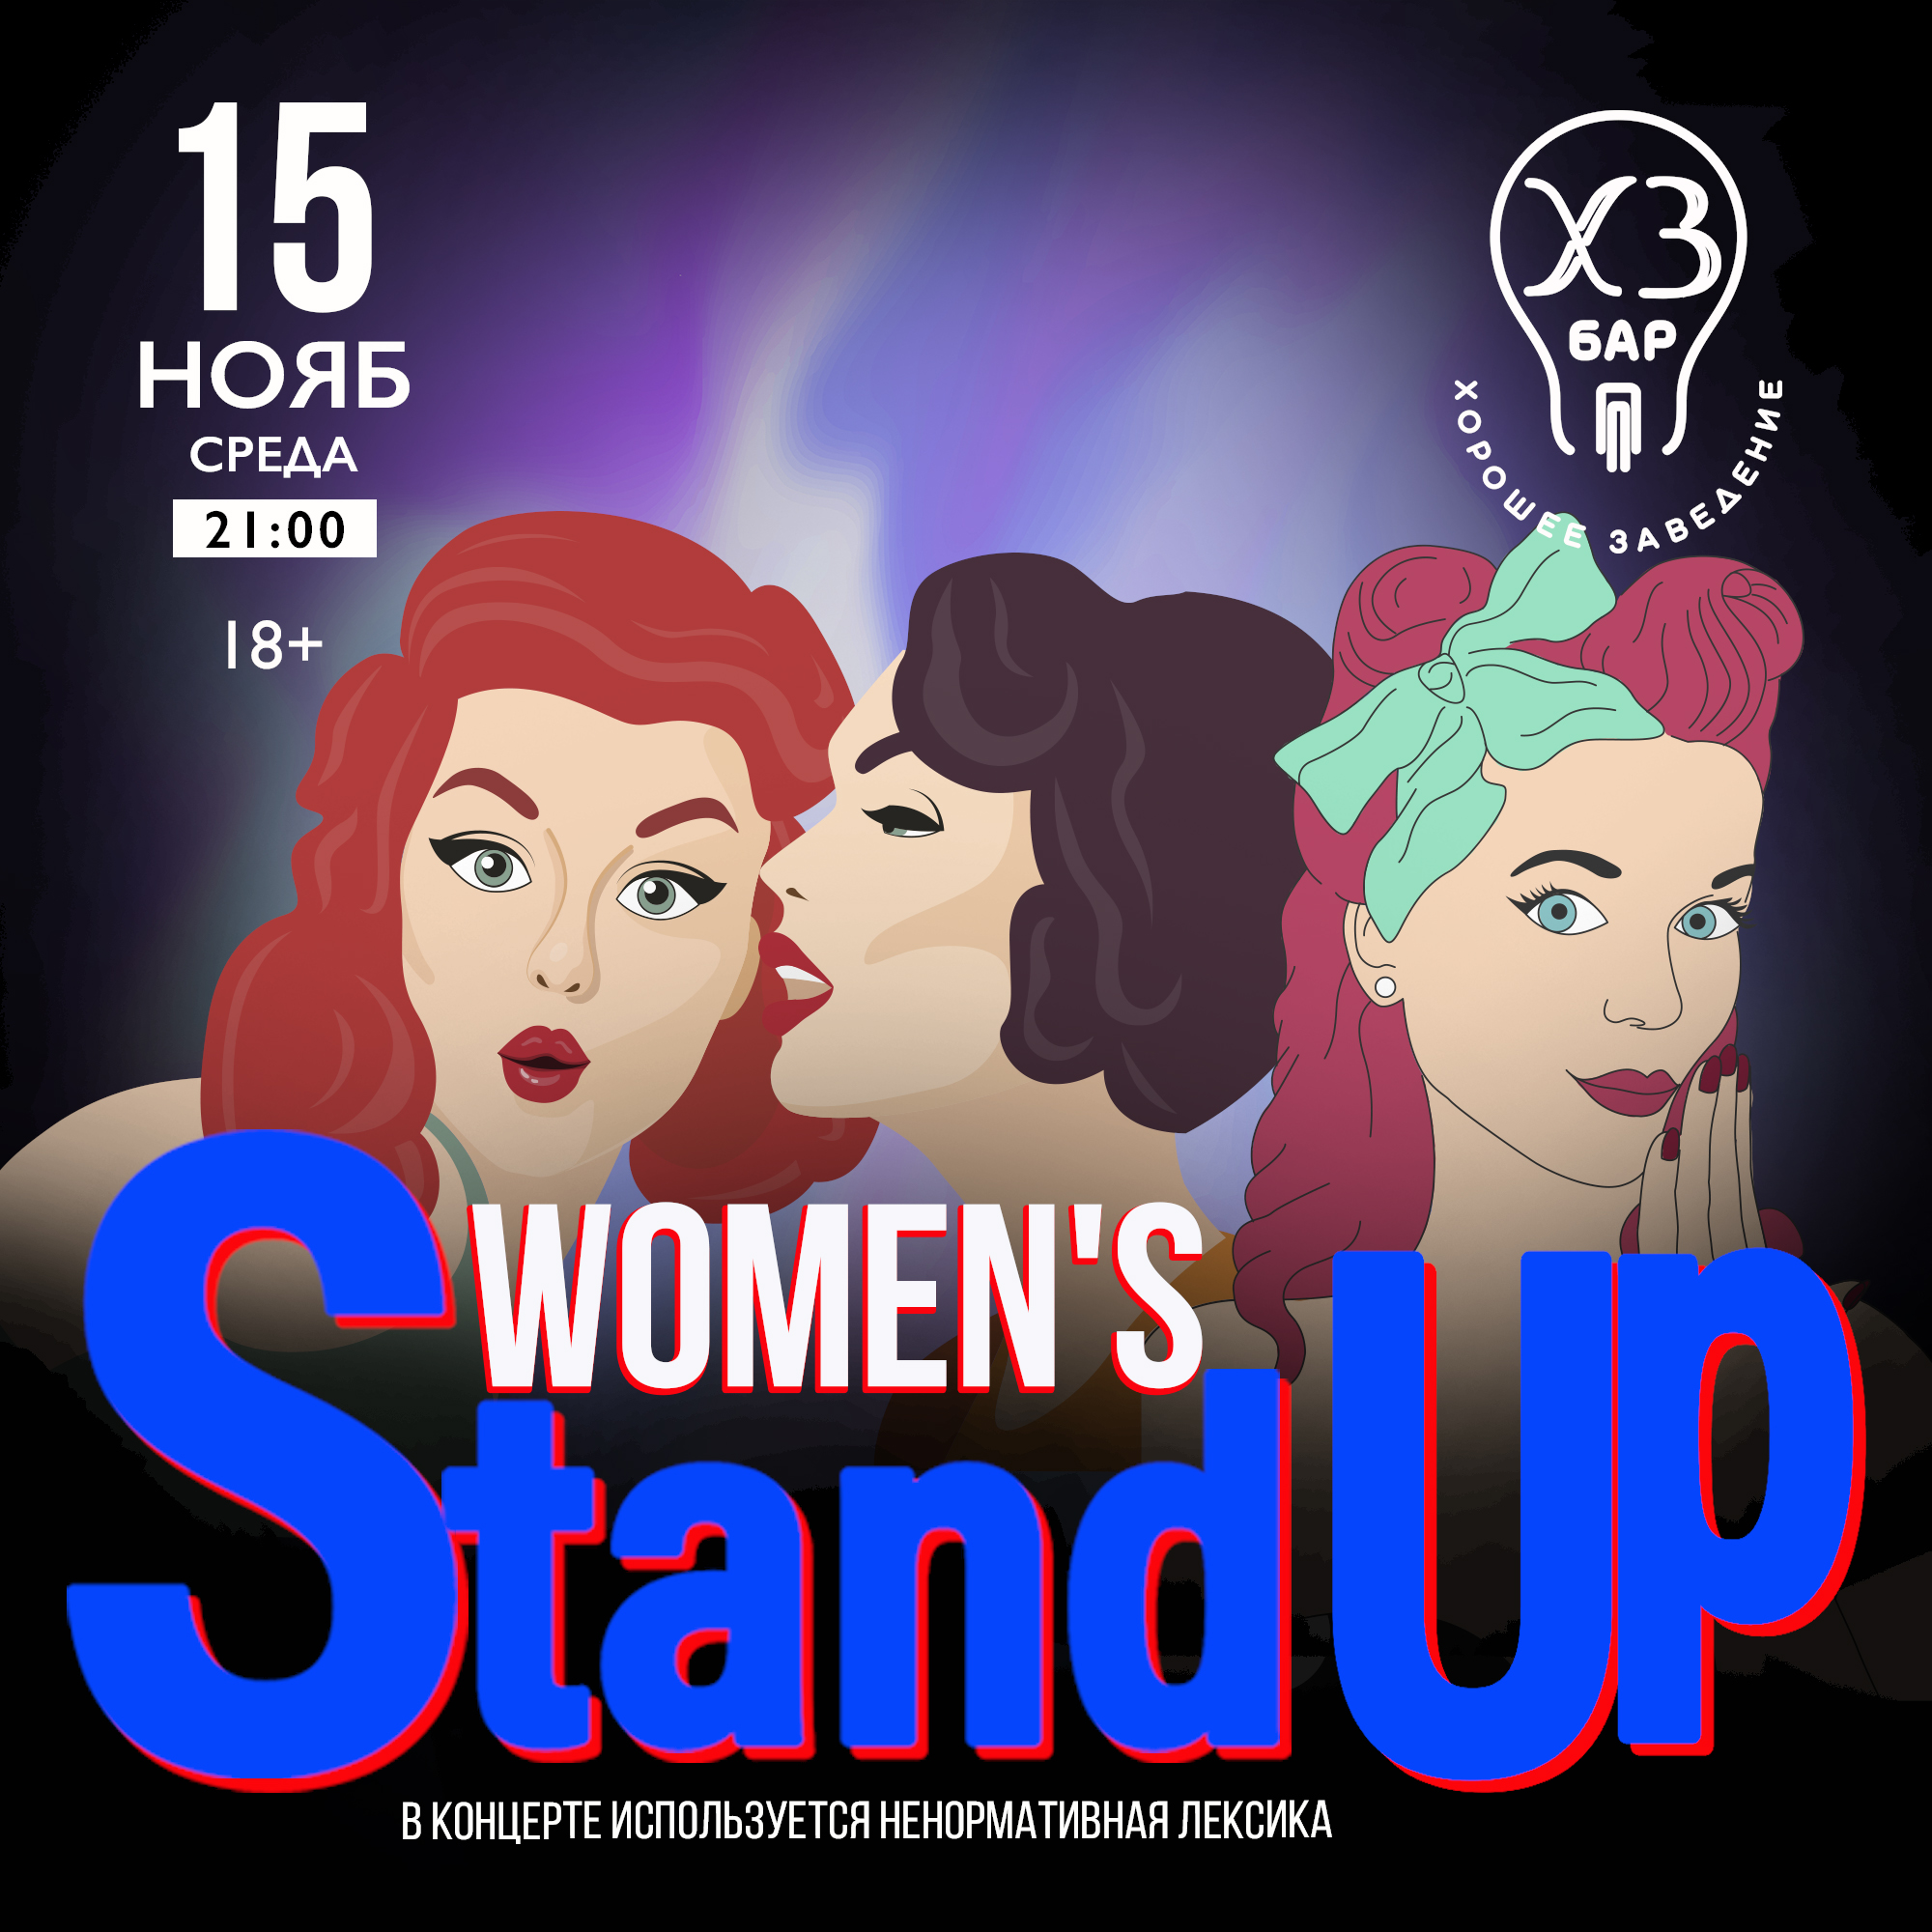 WOMEN'S STAND UP